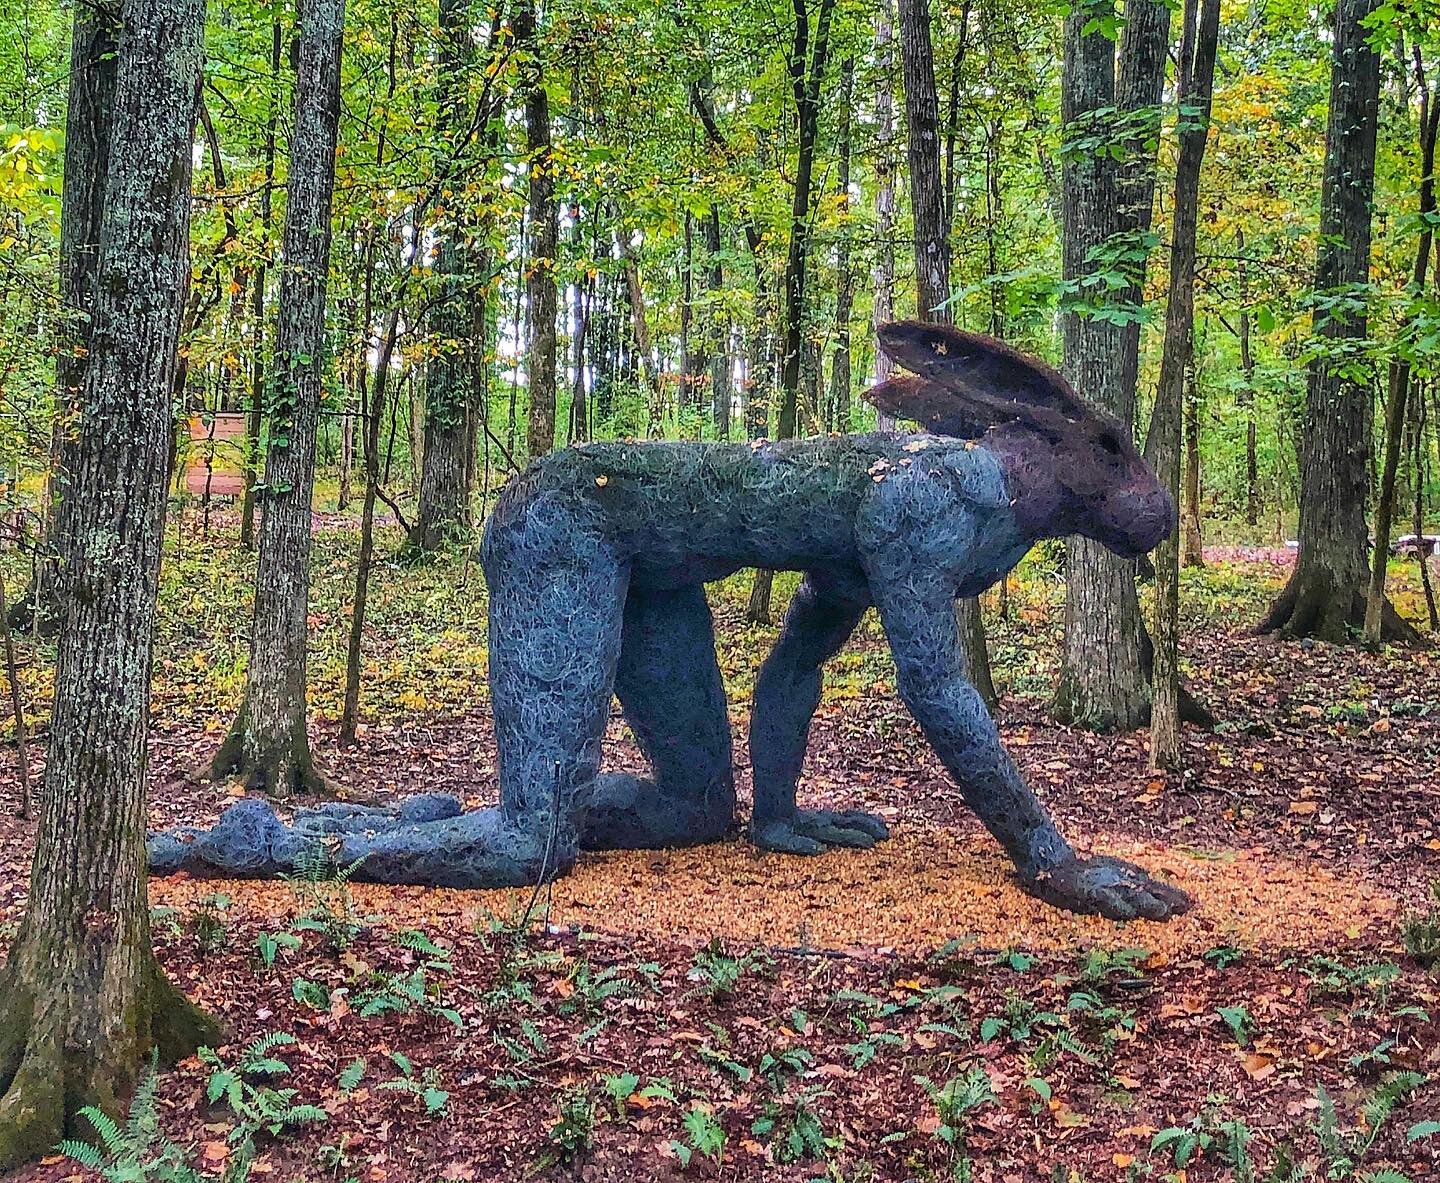 Would you agree that 2020 has been strange, like this sculpture?
&bull; &bull; &bull;
Keep doing you, Mr. Rabbit-Human Thingy. We&rsquo;re all searching our way out together. 
&bull;
&bull;
&bull;
What&rsquo;s been the hardest thing for you this 2020